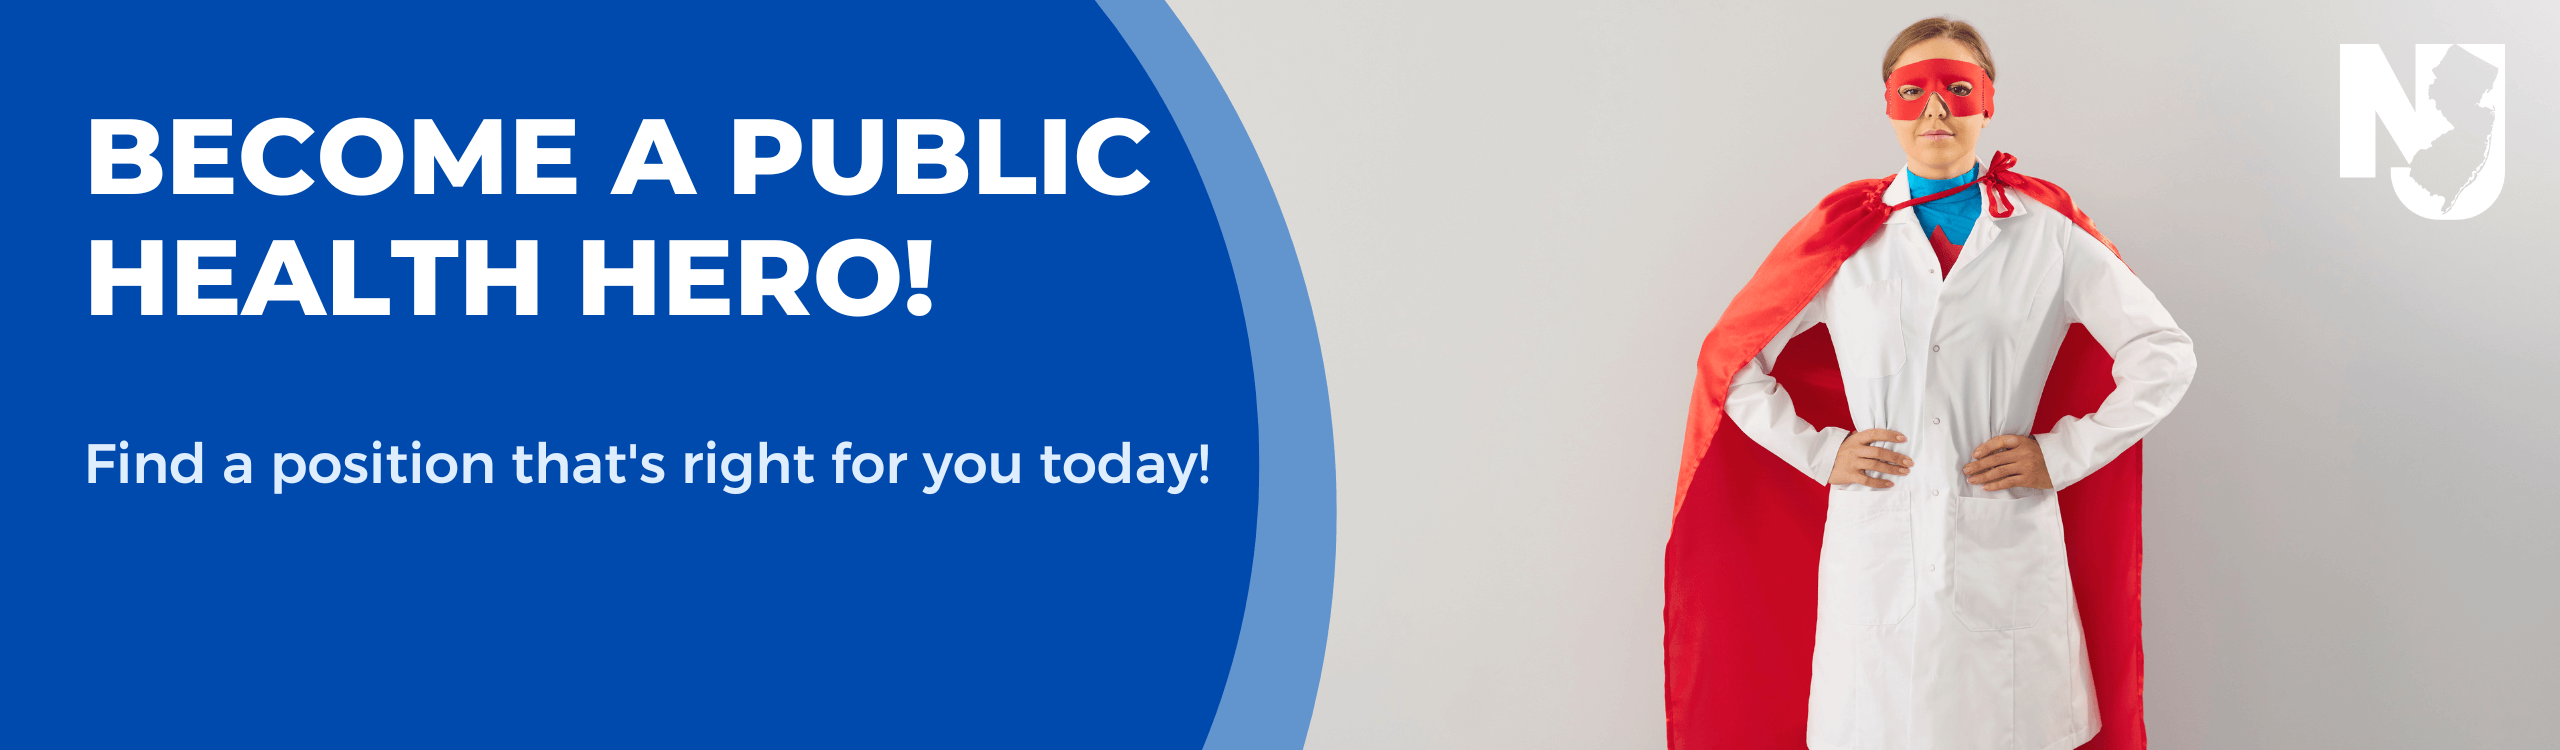 Become a public health hero! Find a position that's right for you today!